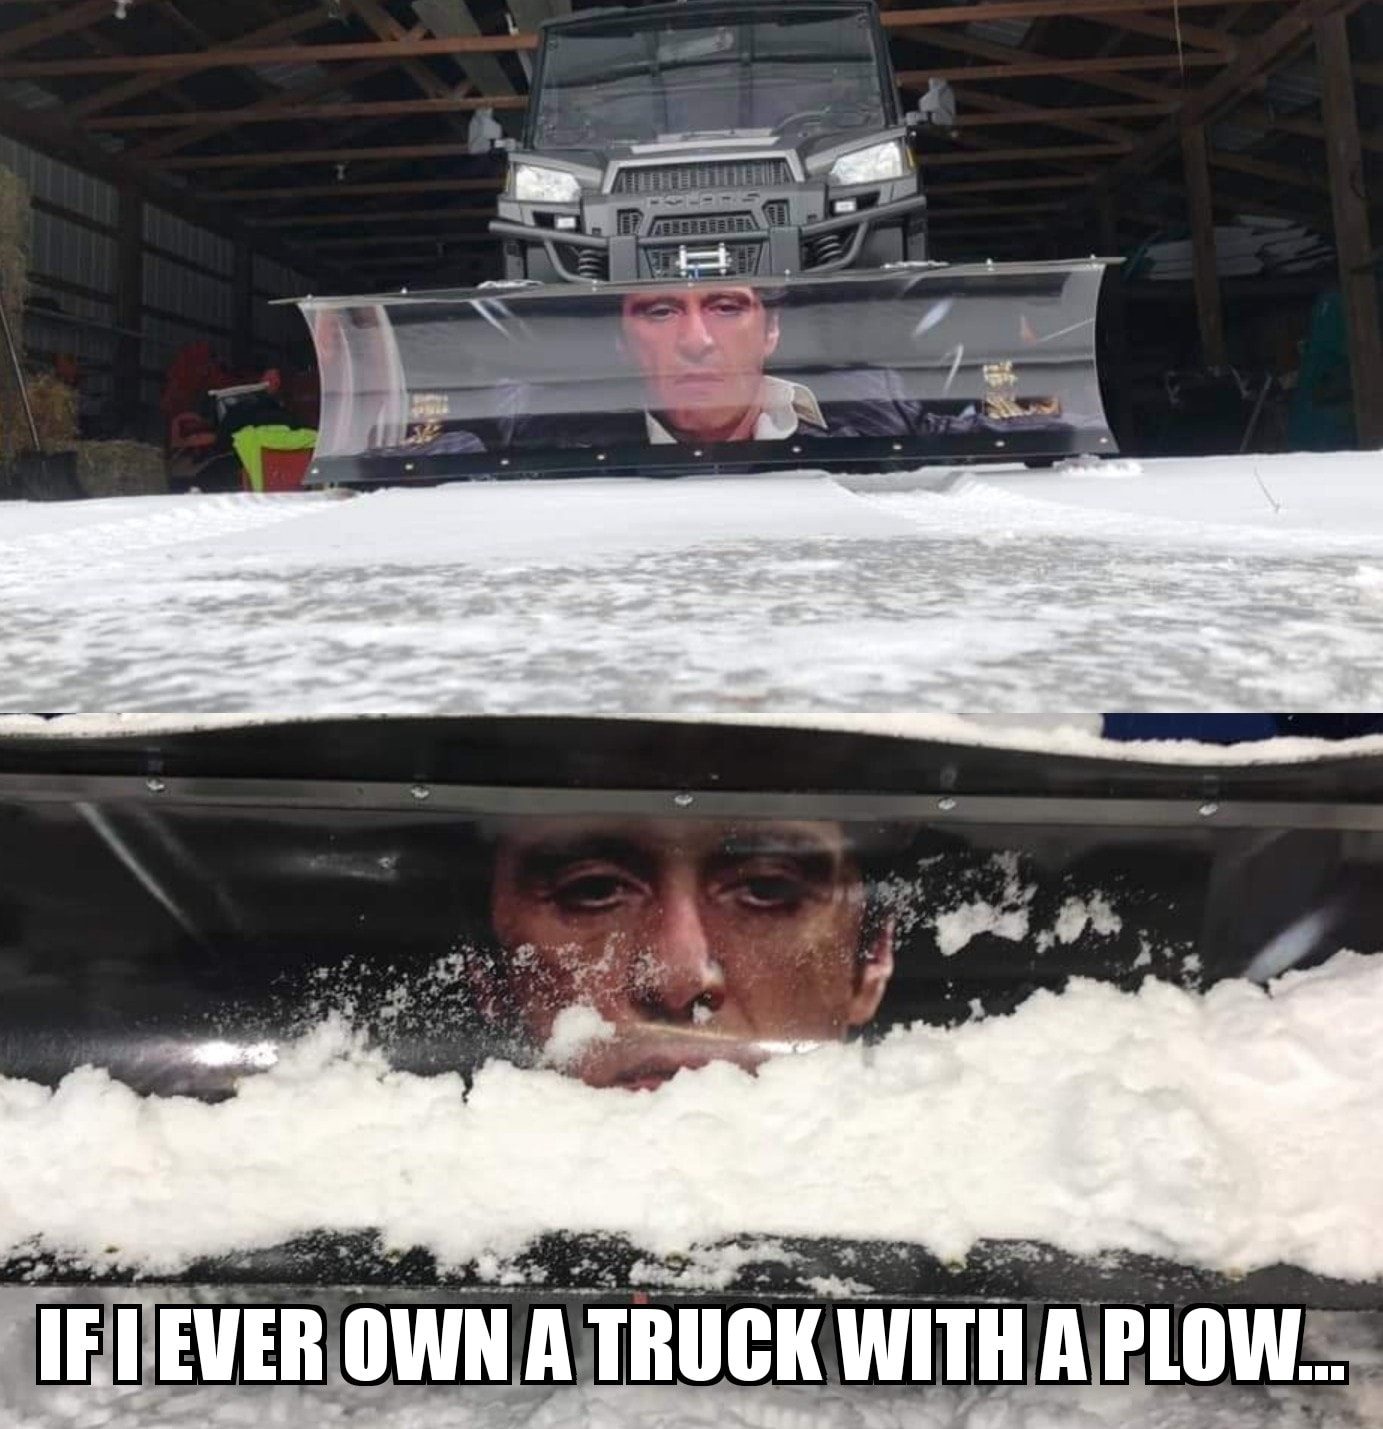 if i ever own a truck with a plow, scarface cocaine snow